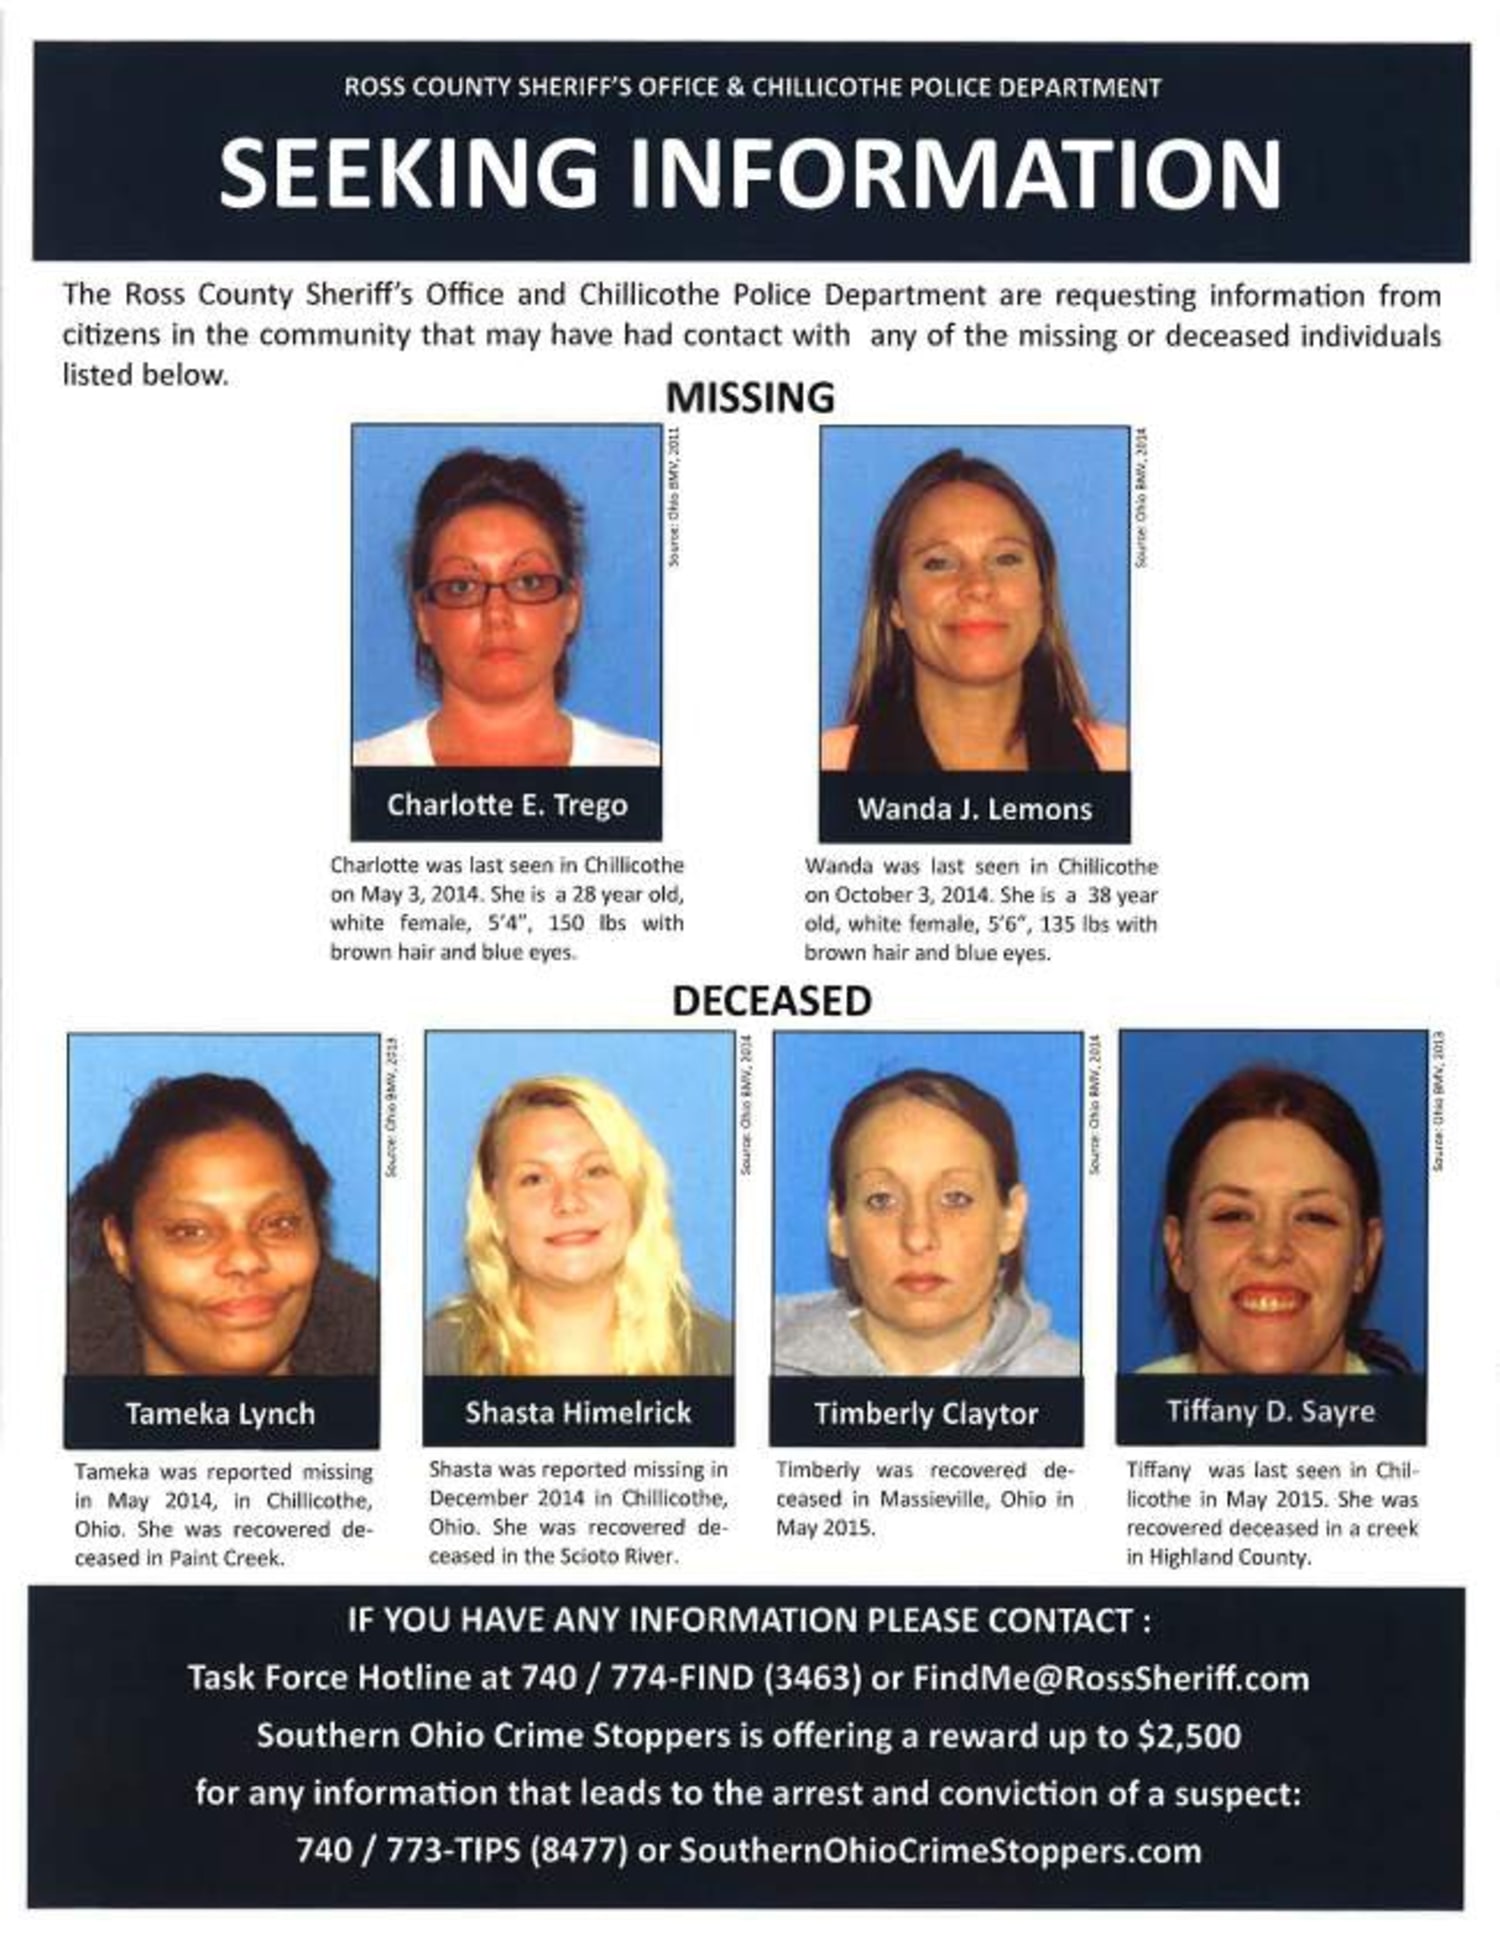 Serial Killer Fears Sparked After Four Women Dead, Two Others Missing in Ohio photo pic